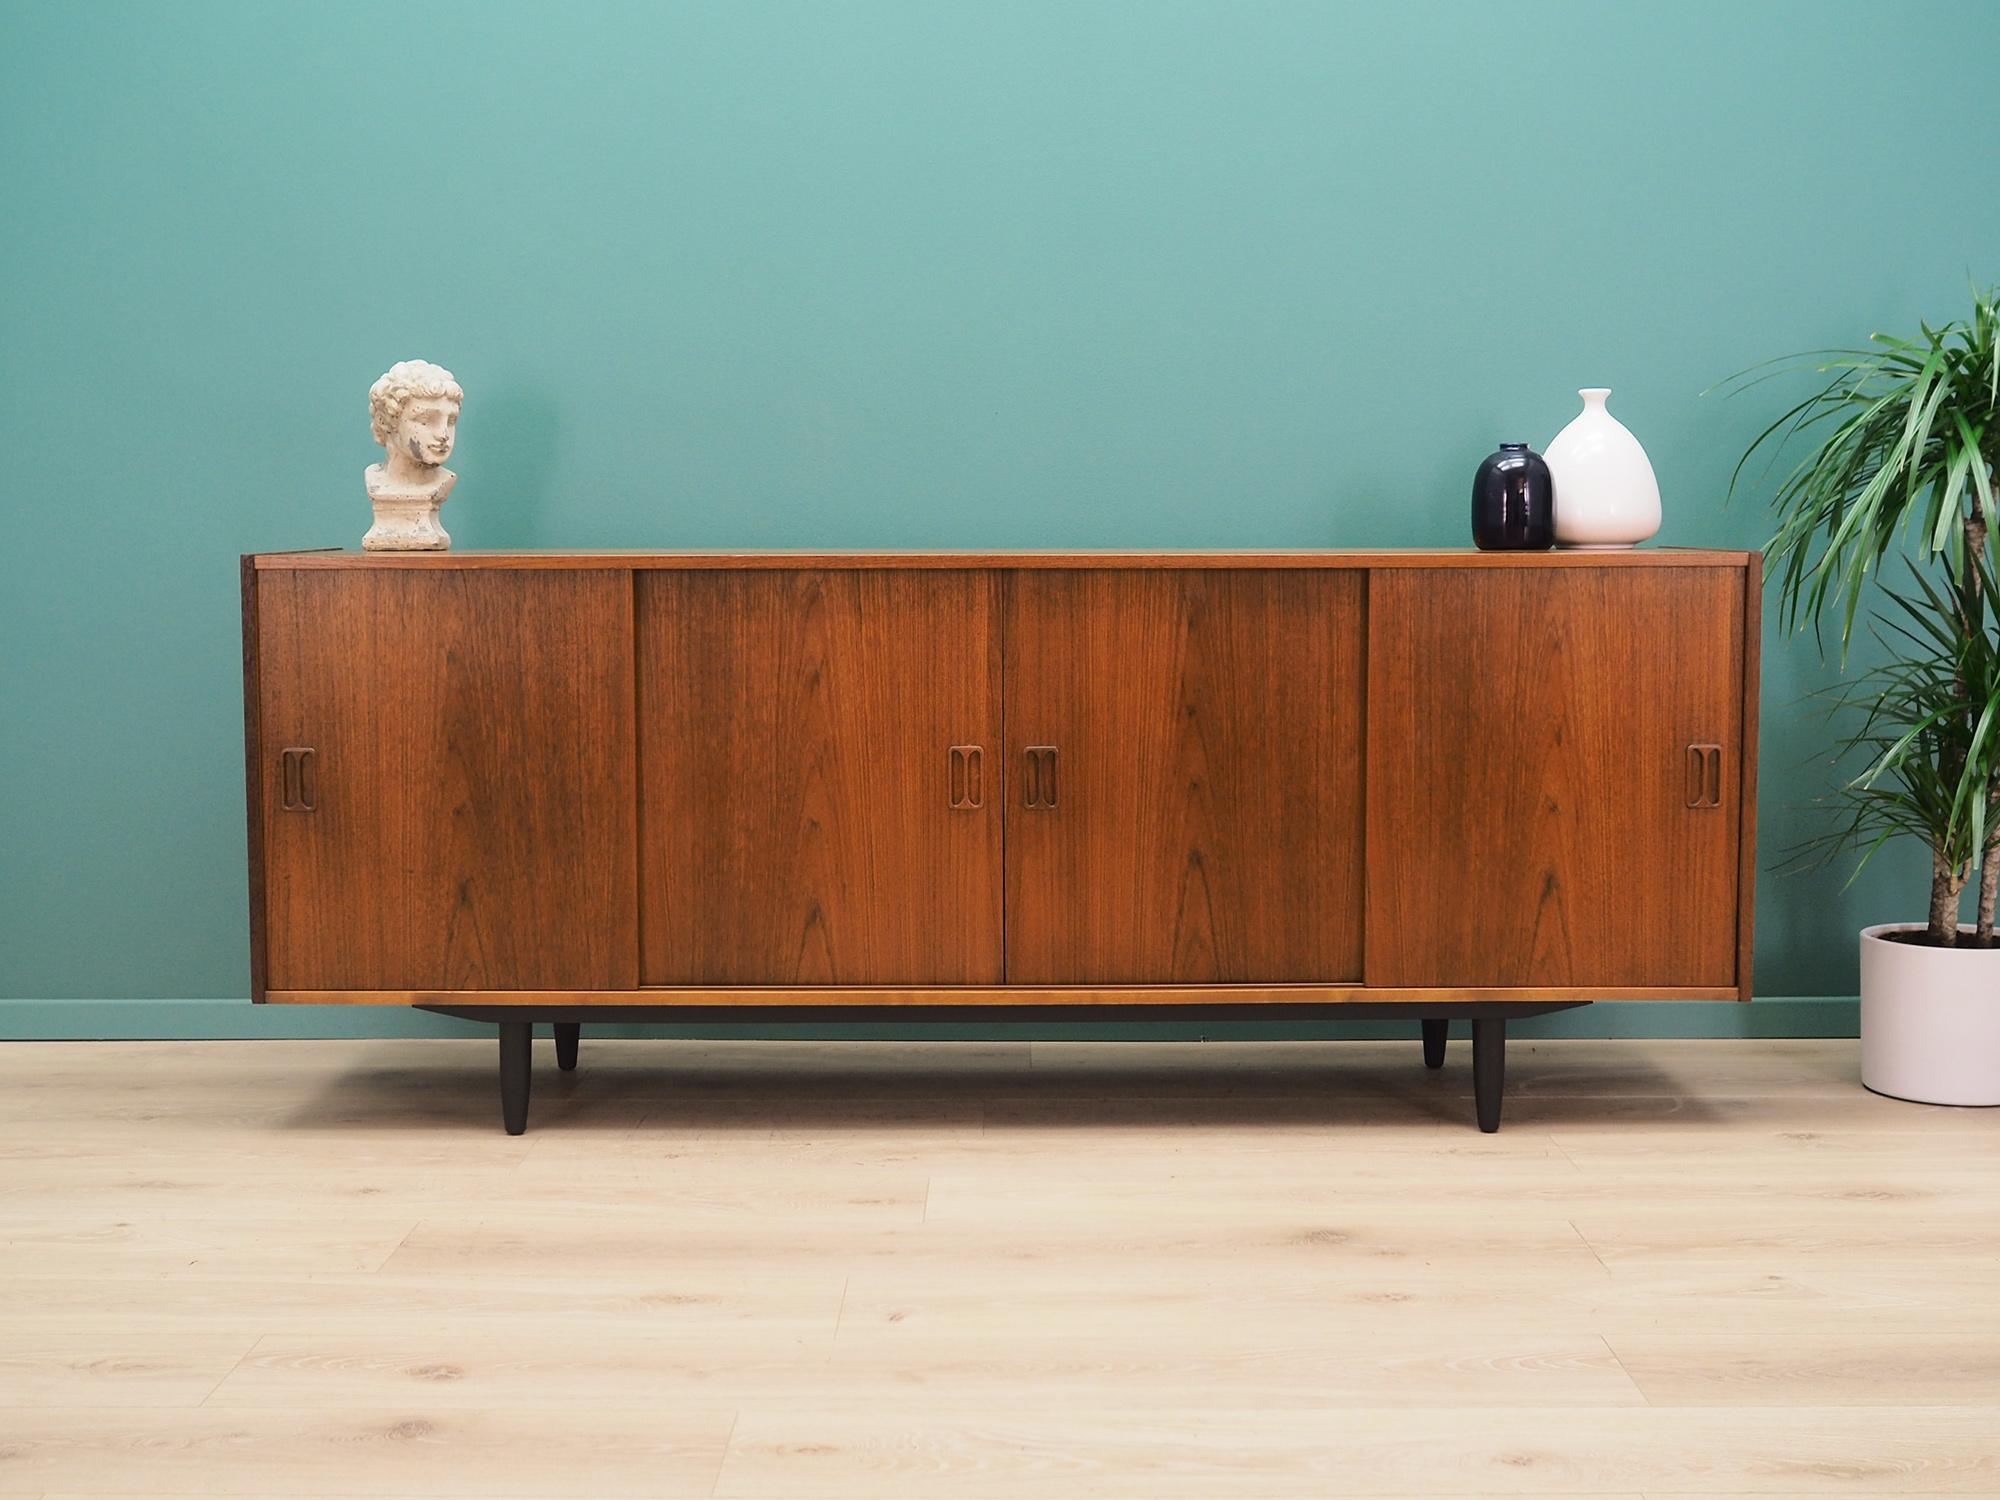 Sideboard was made in the 1960s and was produced by the famous Danish manufactory Westergaard.

The structure is covered with teak veneer. The legs are made of solid wood stained black. Surface after refreshing. Inside the space has been filled